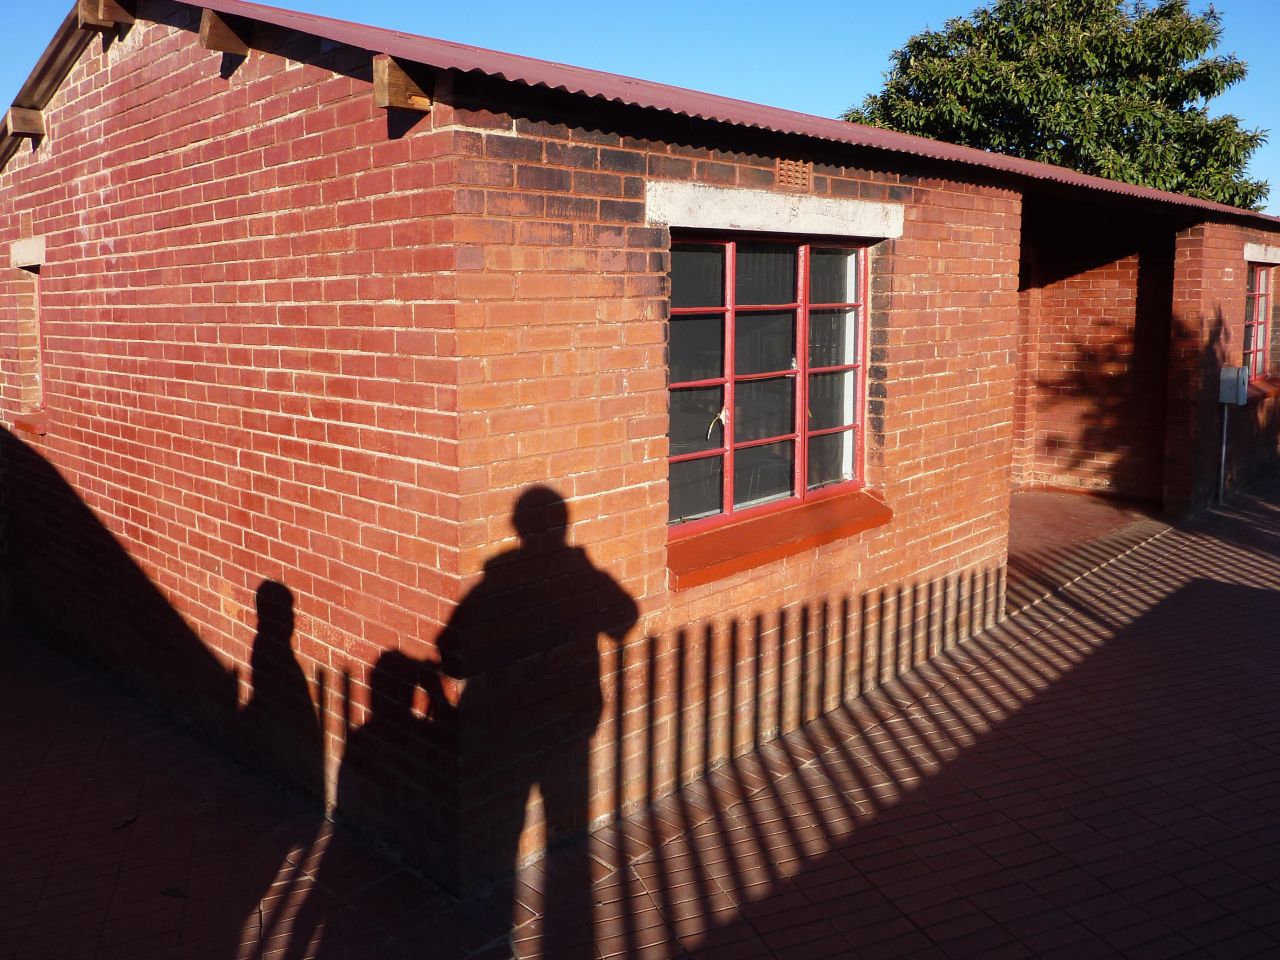 Mandela lived in this house in the Soweto area of Johannesburg before he was imprisoned. The house is now open to visitors.